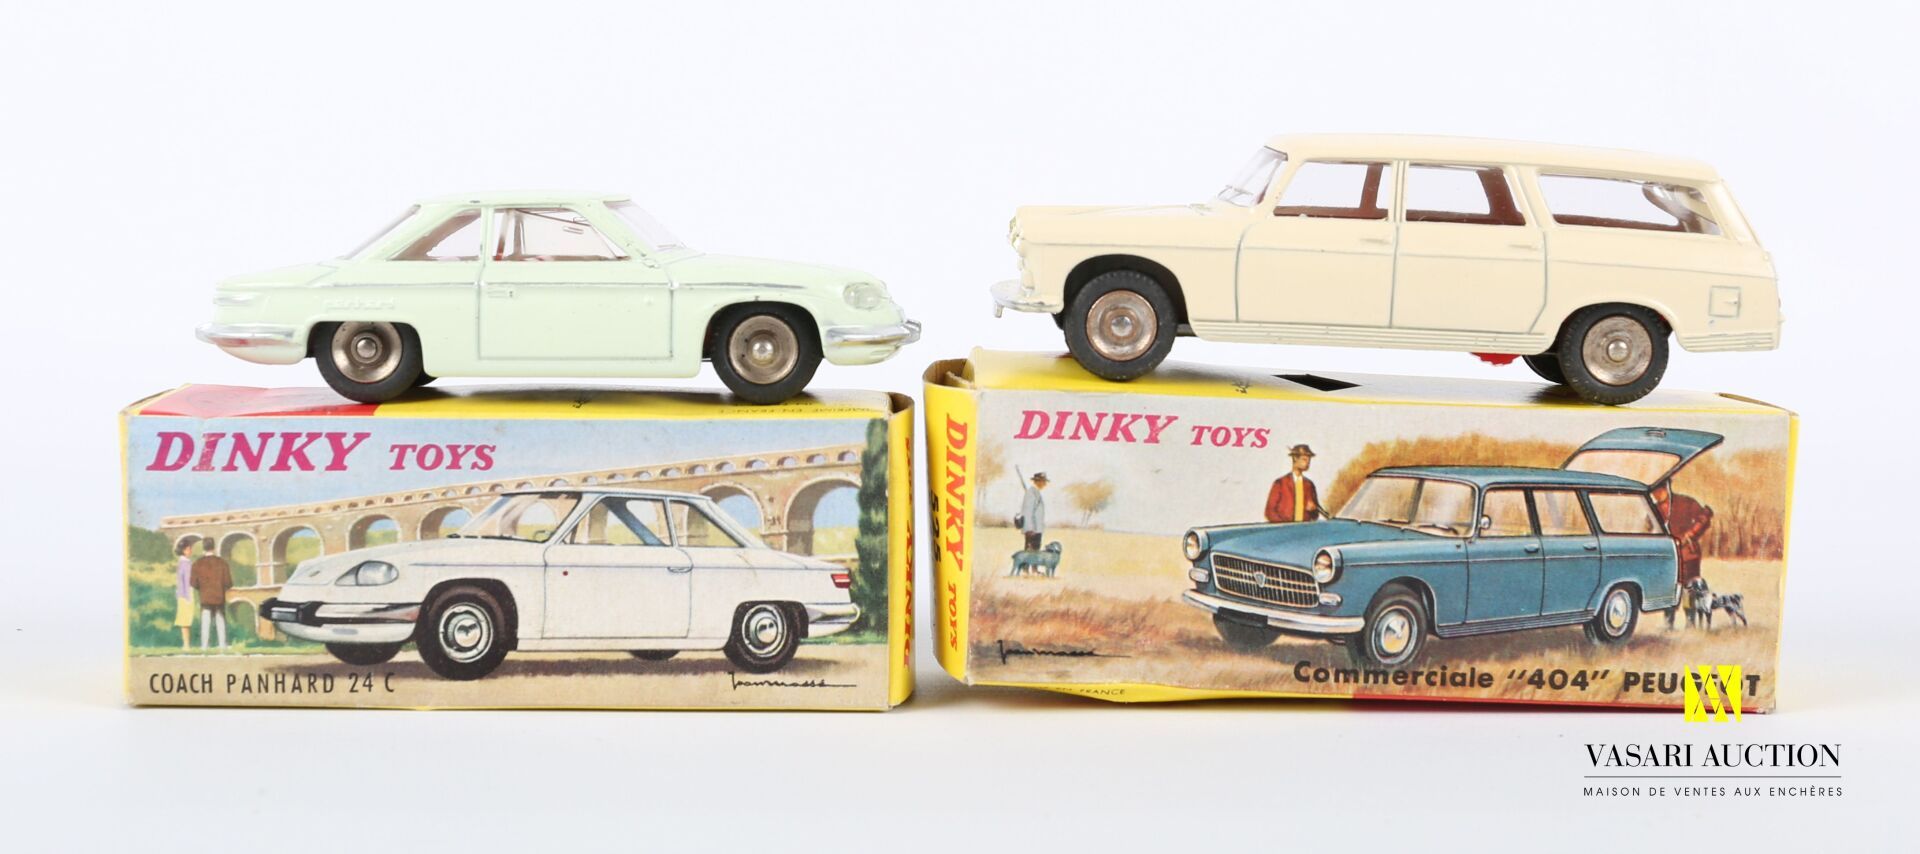 Null DINKY TOYS (FR)

Lot of two vehicles : Coach Panhard 24C Ref 524 - Commerci&hellip;